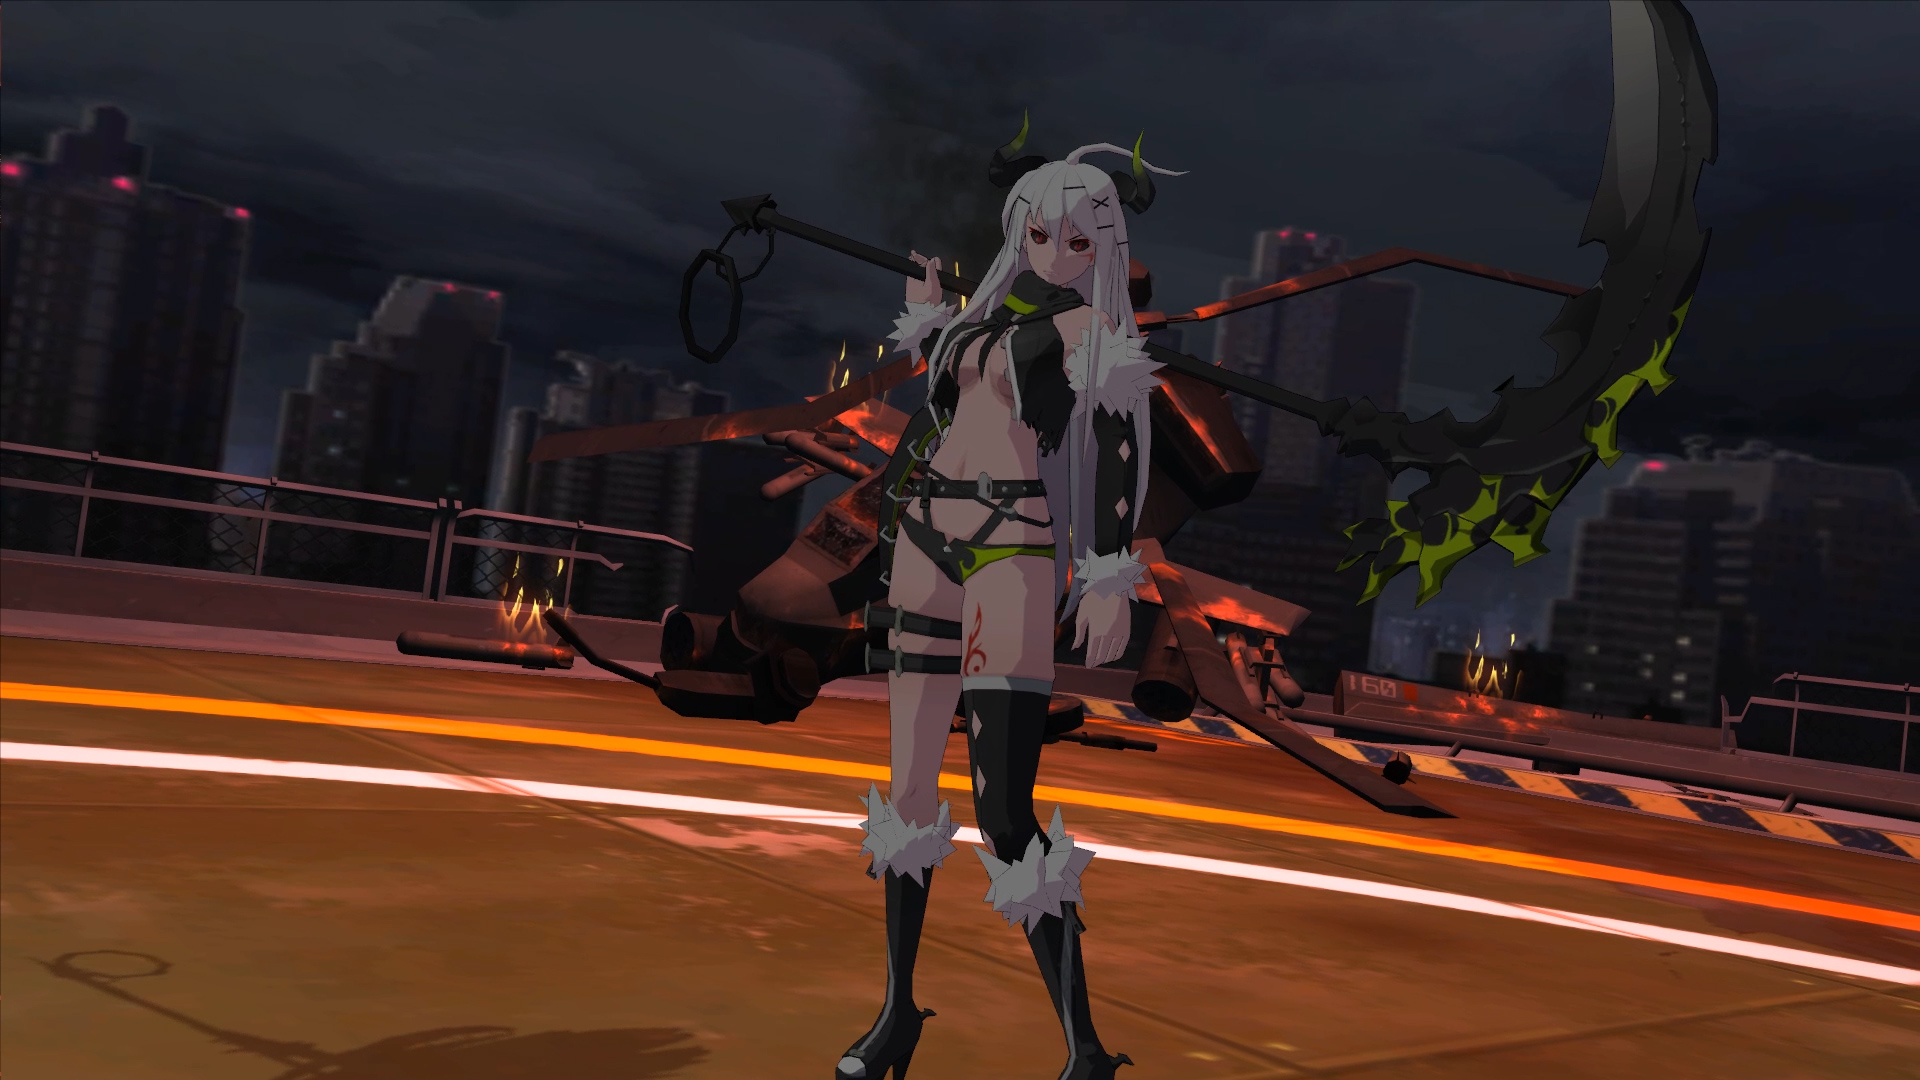 SoulWorker - Anime Action MMO screenshots.